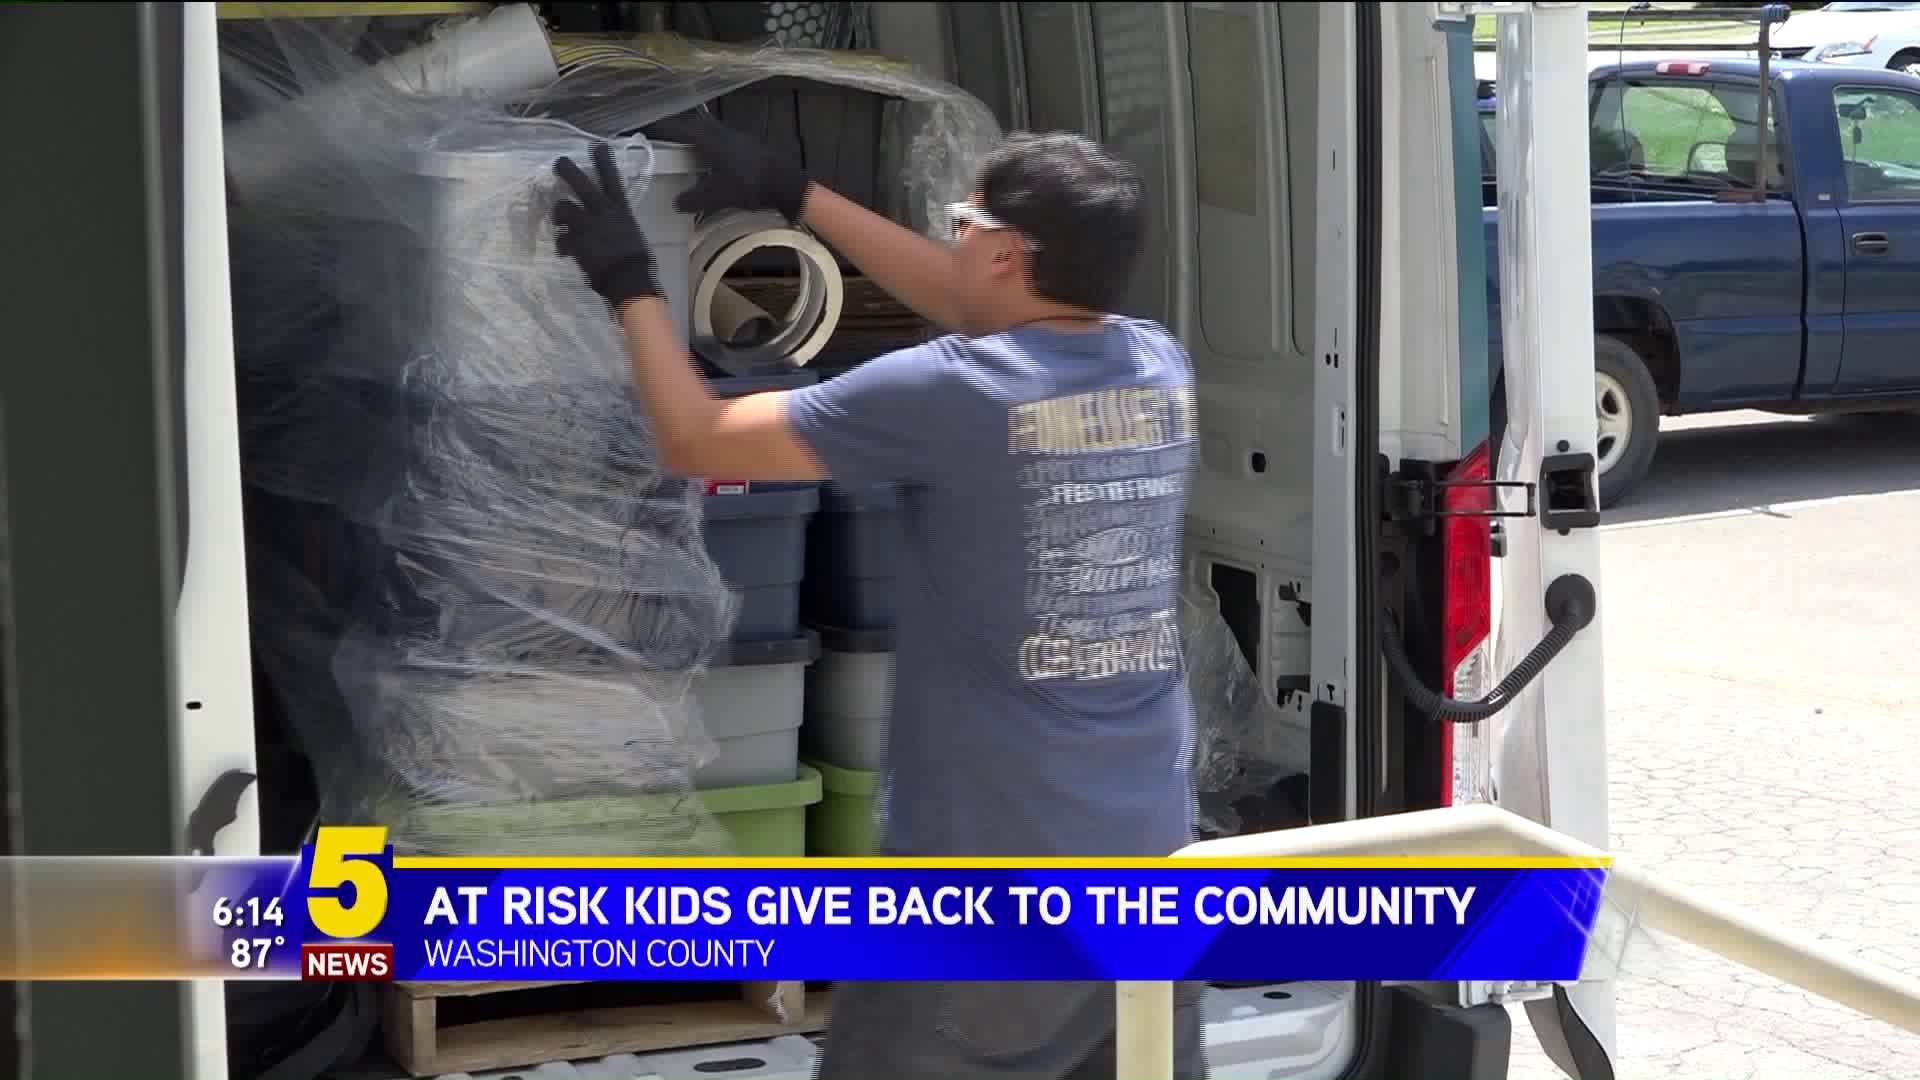 At Risk Kids Give Back To The Community